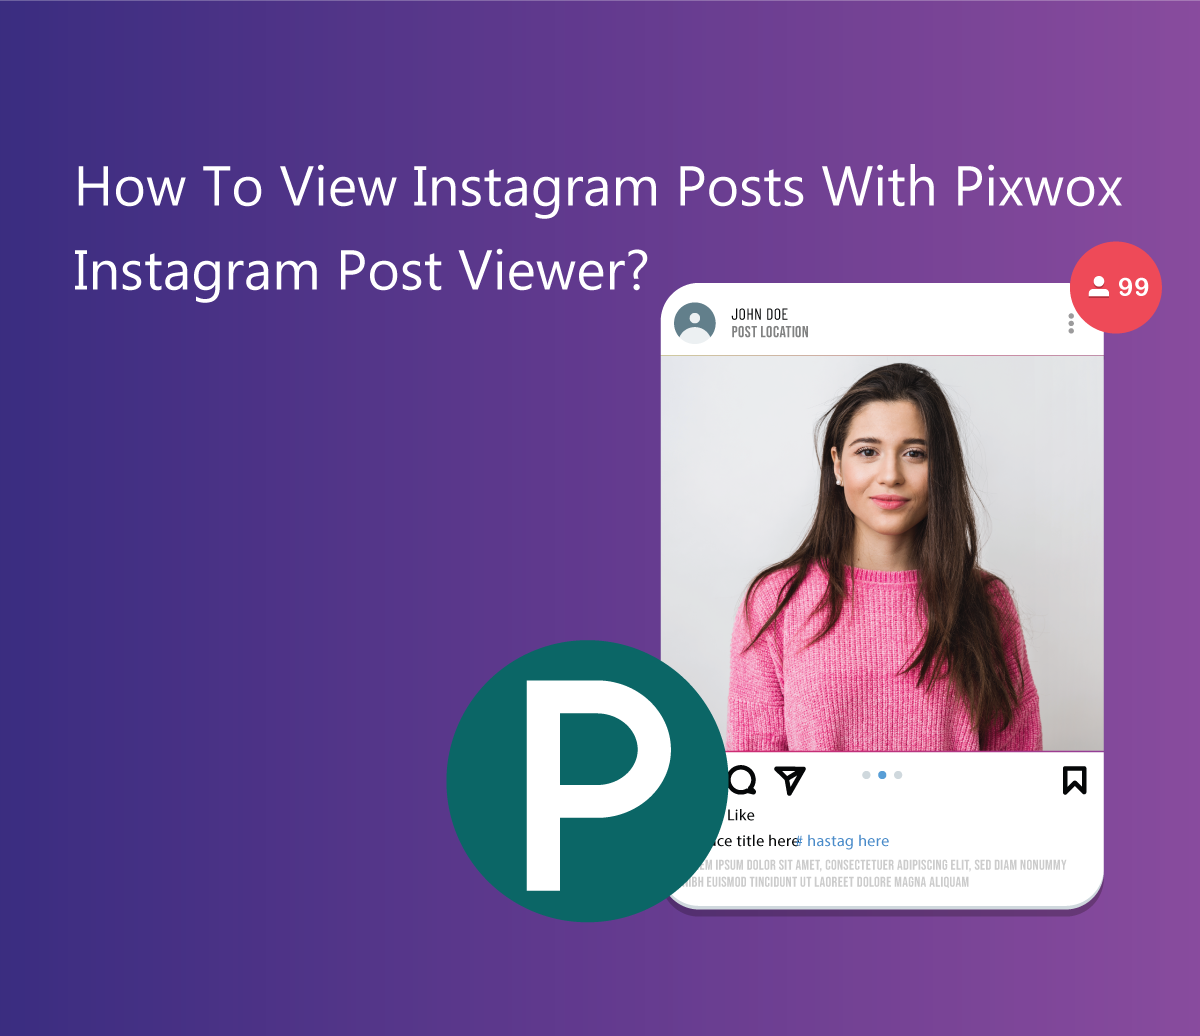 How To View Instagram Posts With Pixwox Instagram Post Viewer?